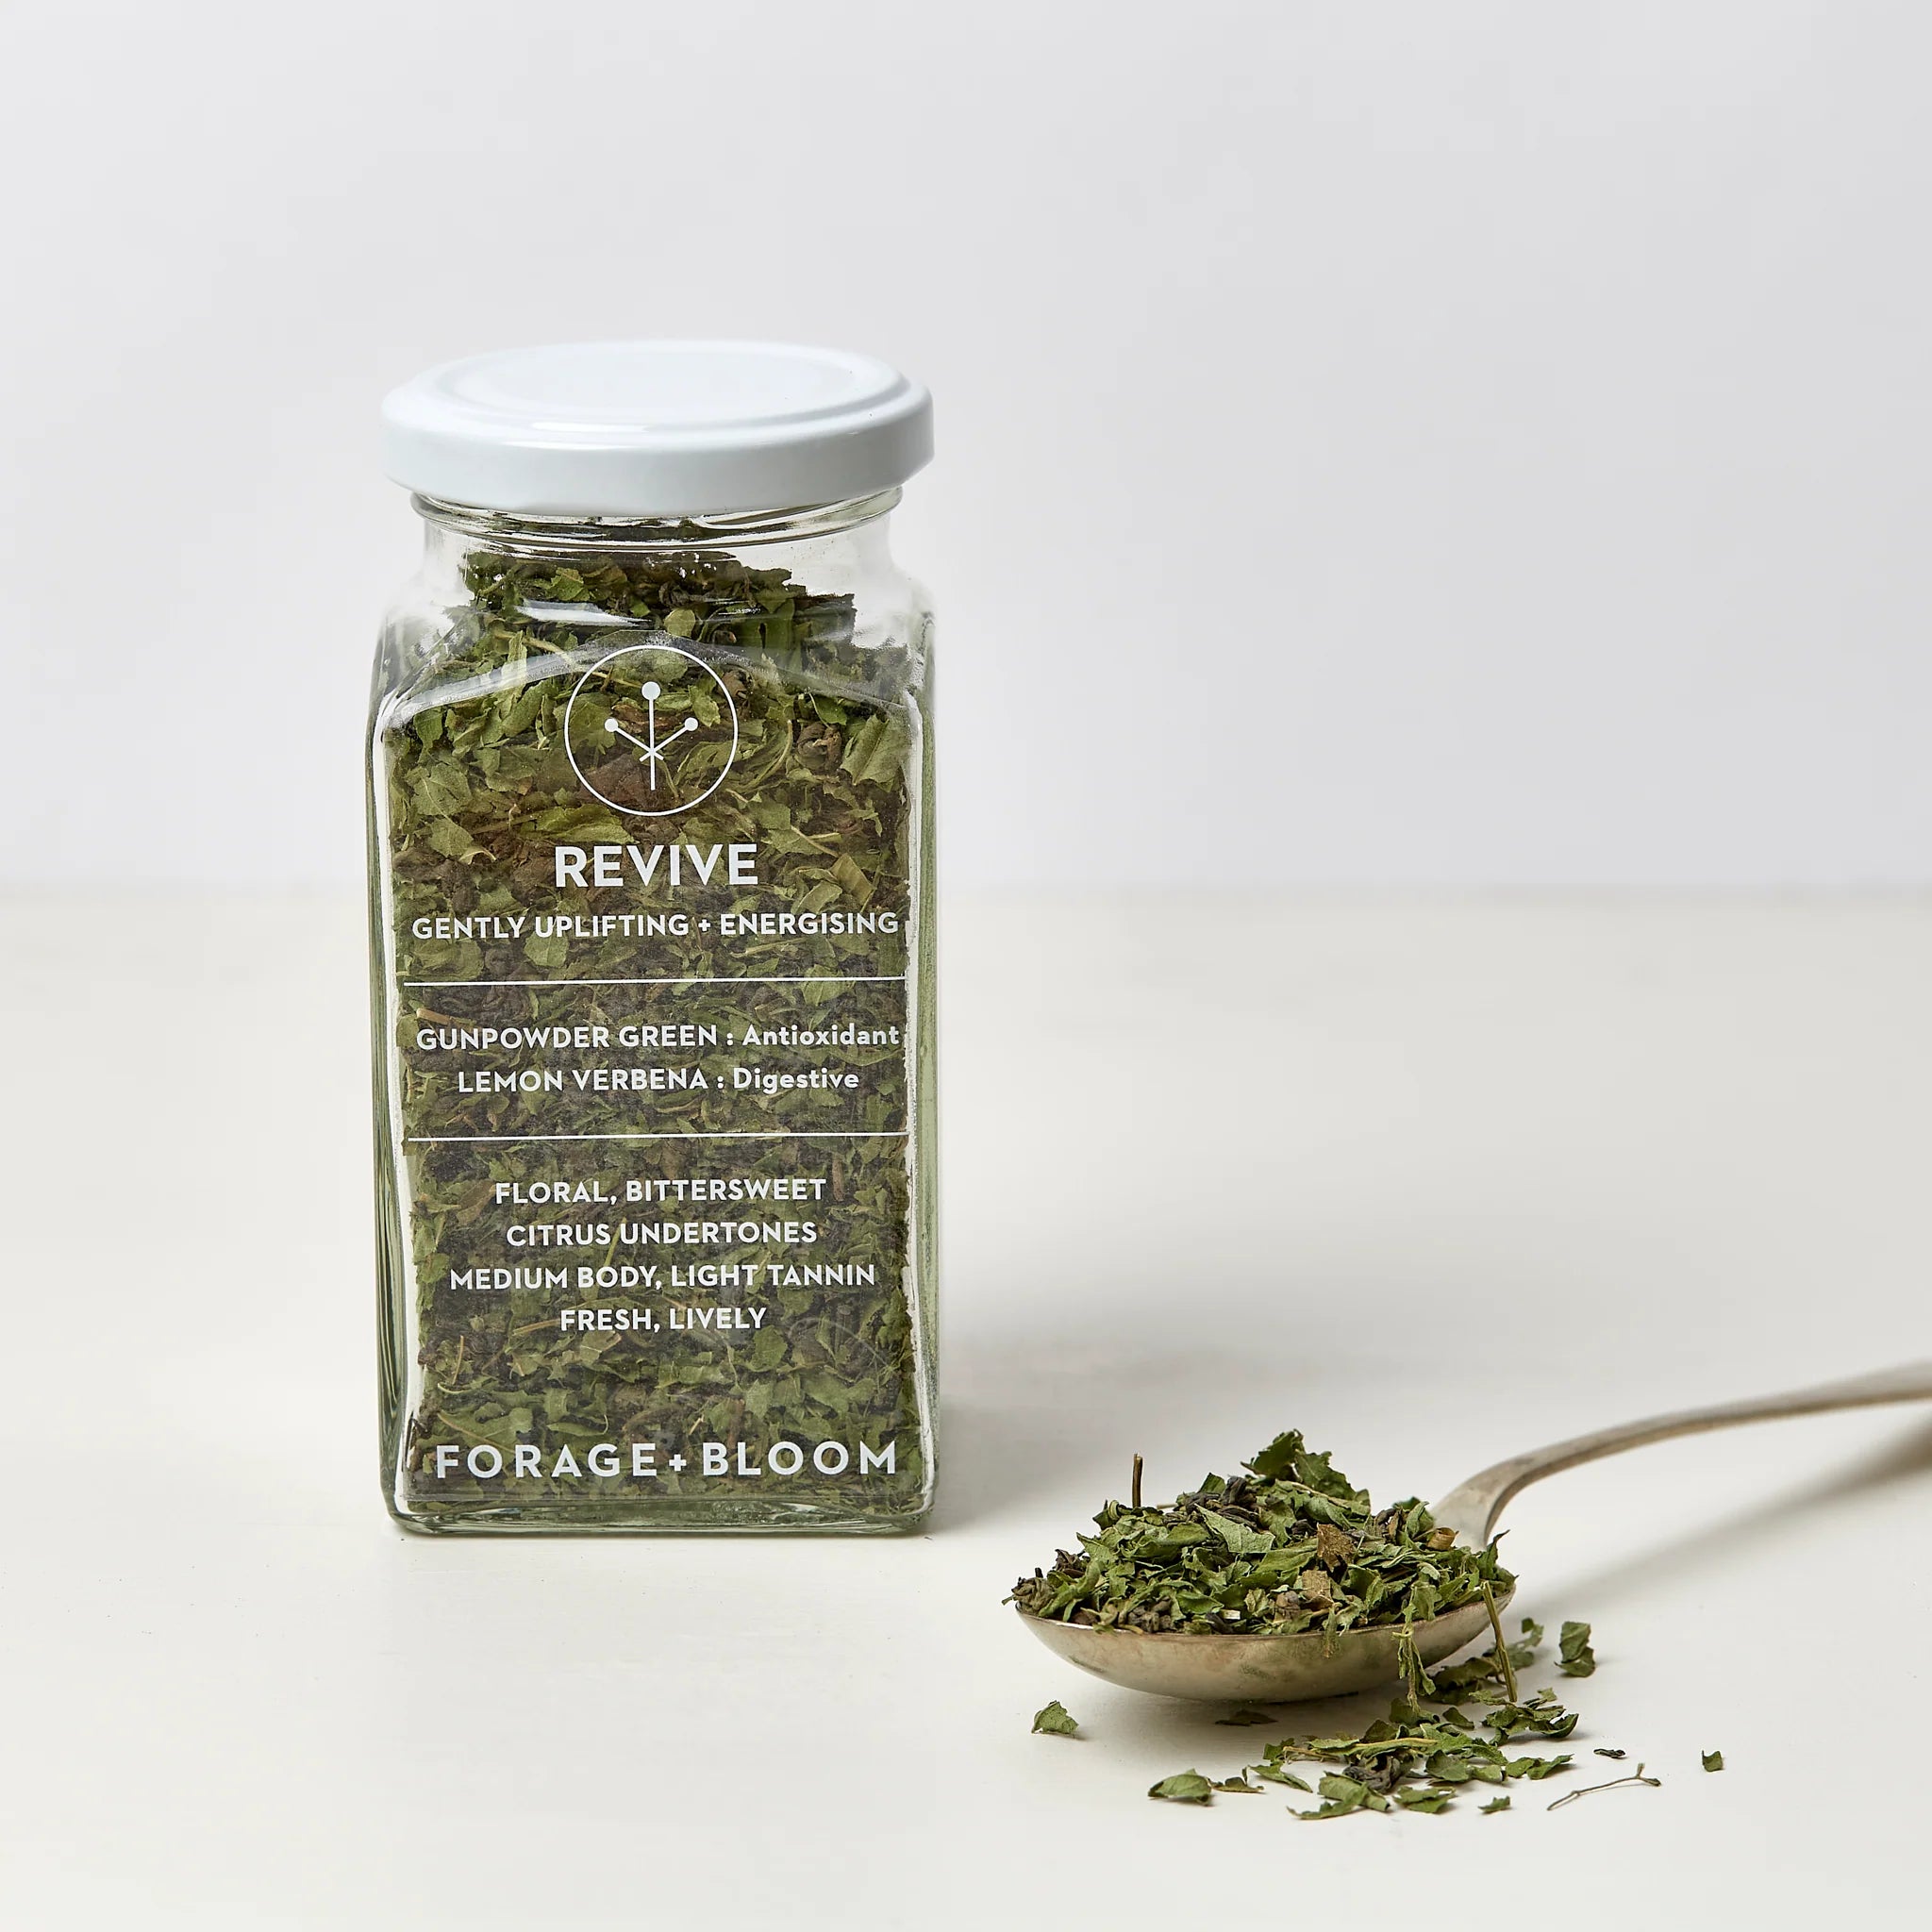 A glass jar filled with loose leaf tea, labeled "Tea for Two - gently uplifting, energising" with descriptors such as "gunpowder green, antioxidant, lemon verbena, citrus undertones," from giftbox co.